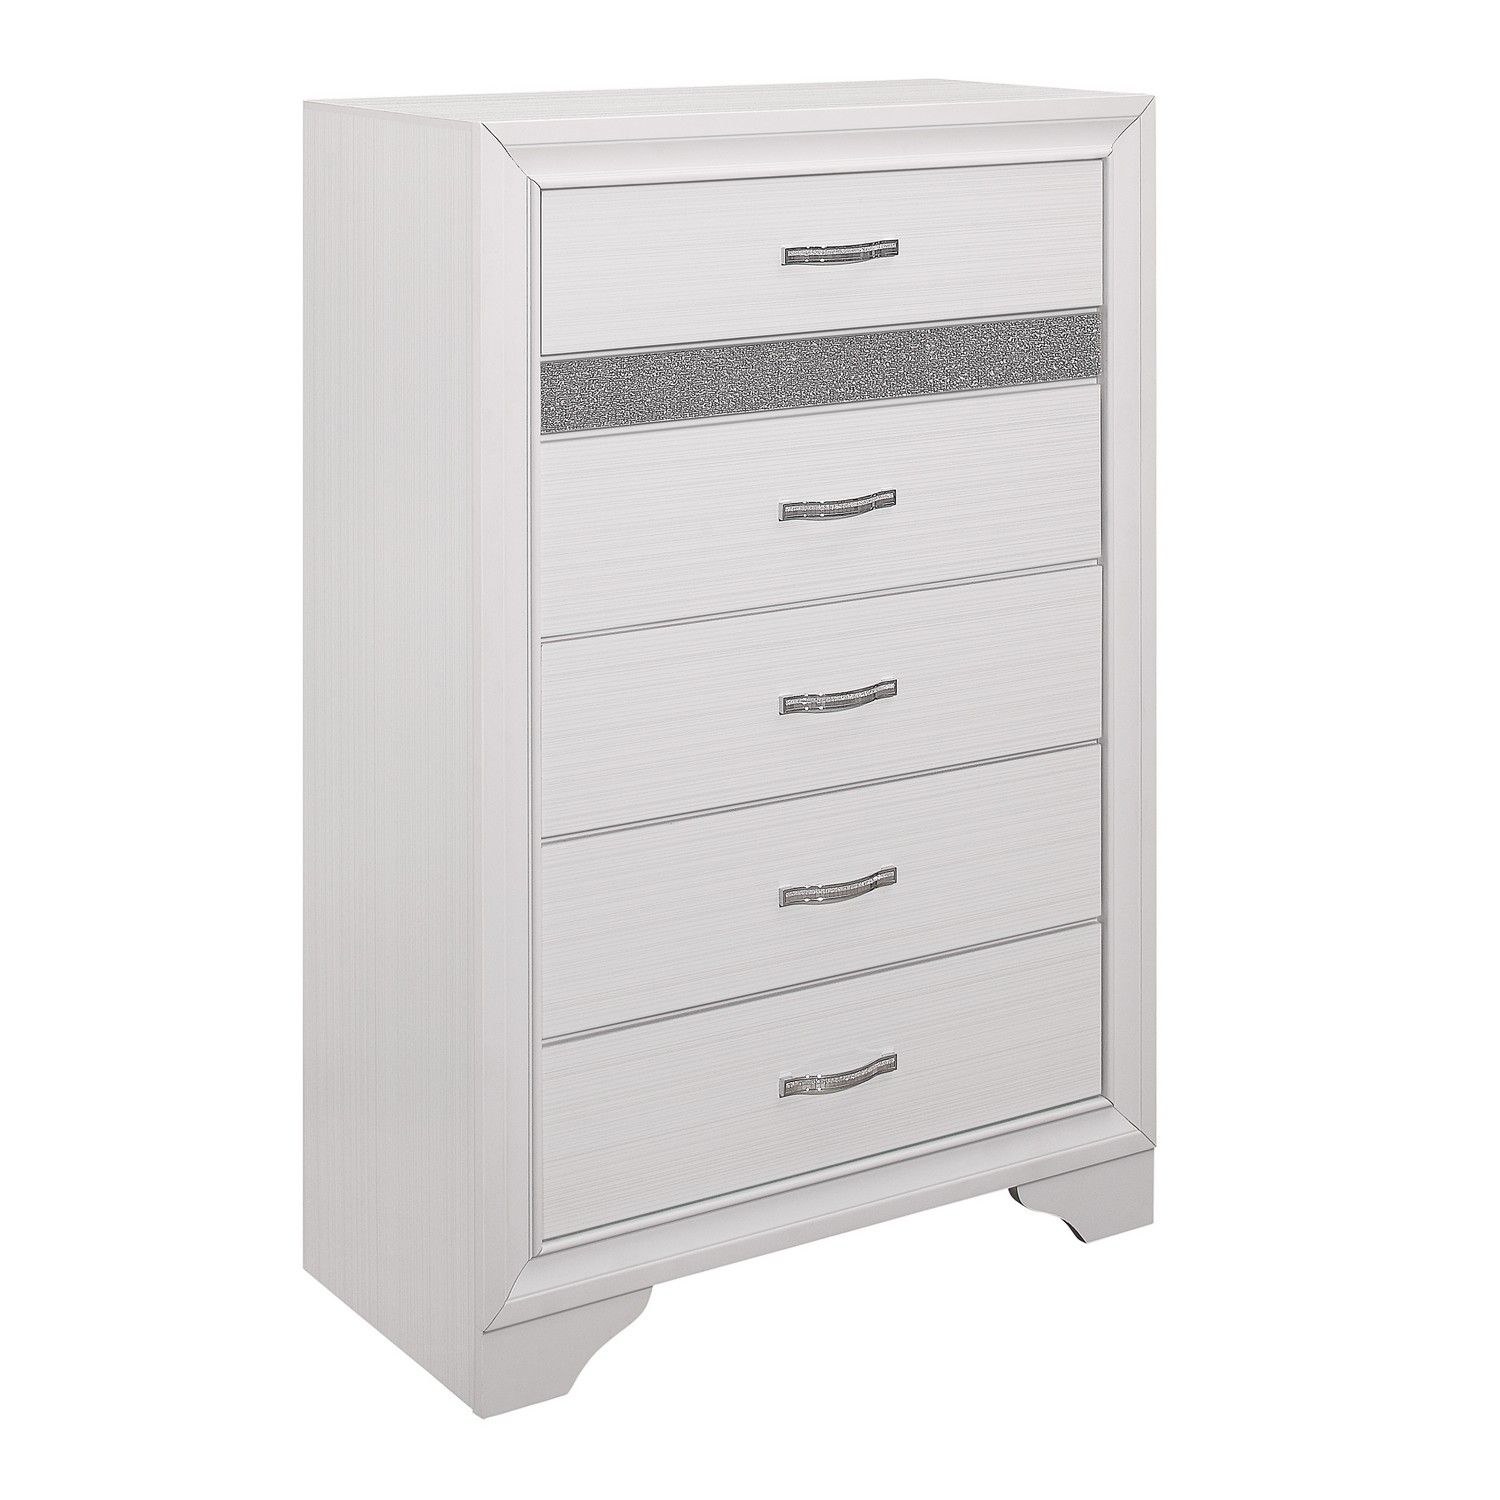 Homelegance Luster Chest - Two-tone : White And Silver Glitter